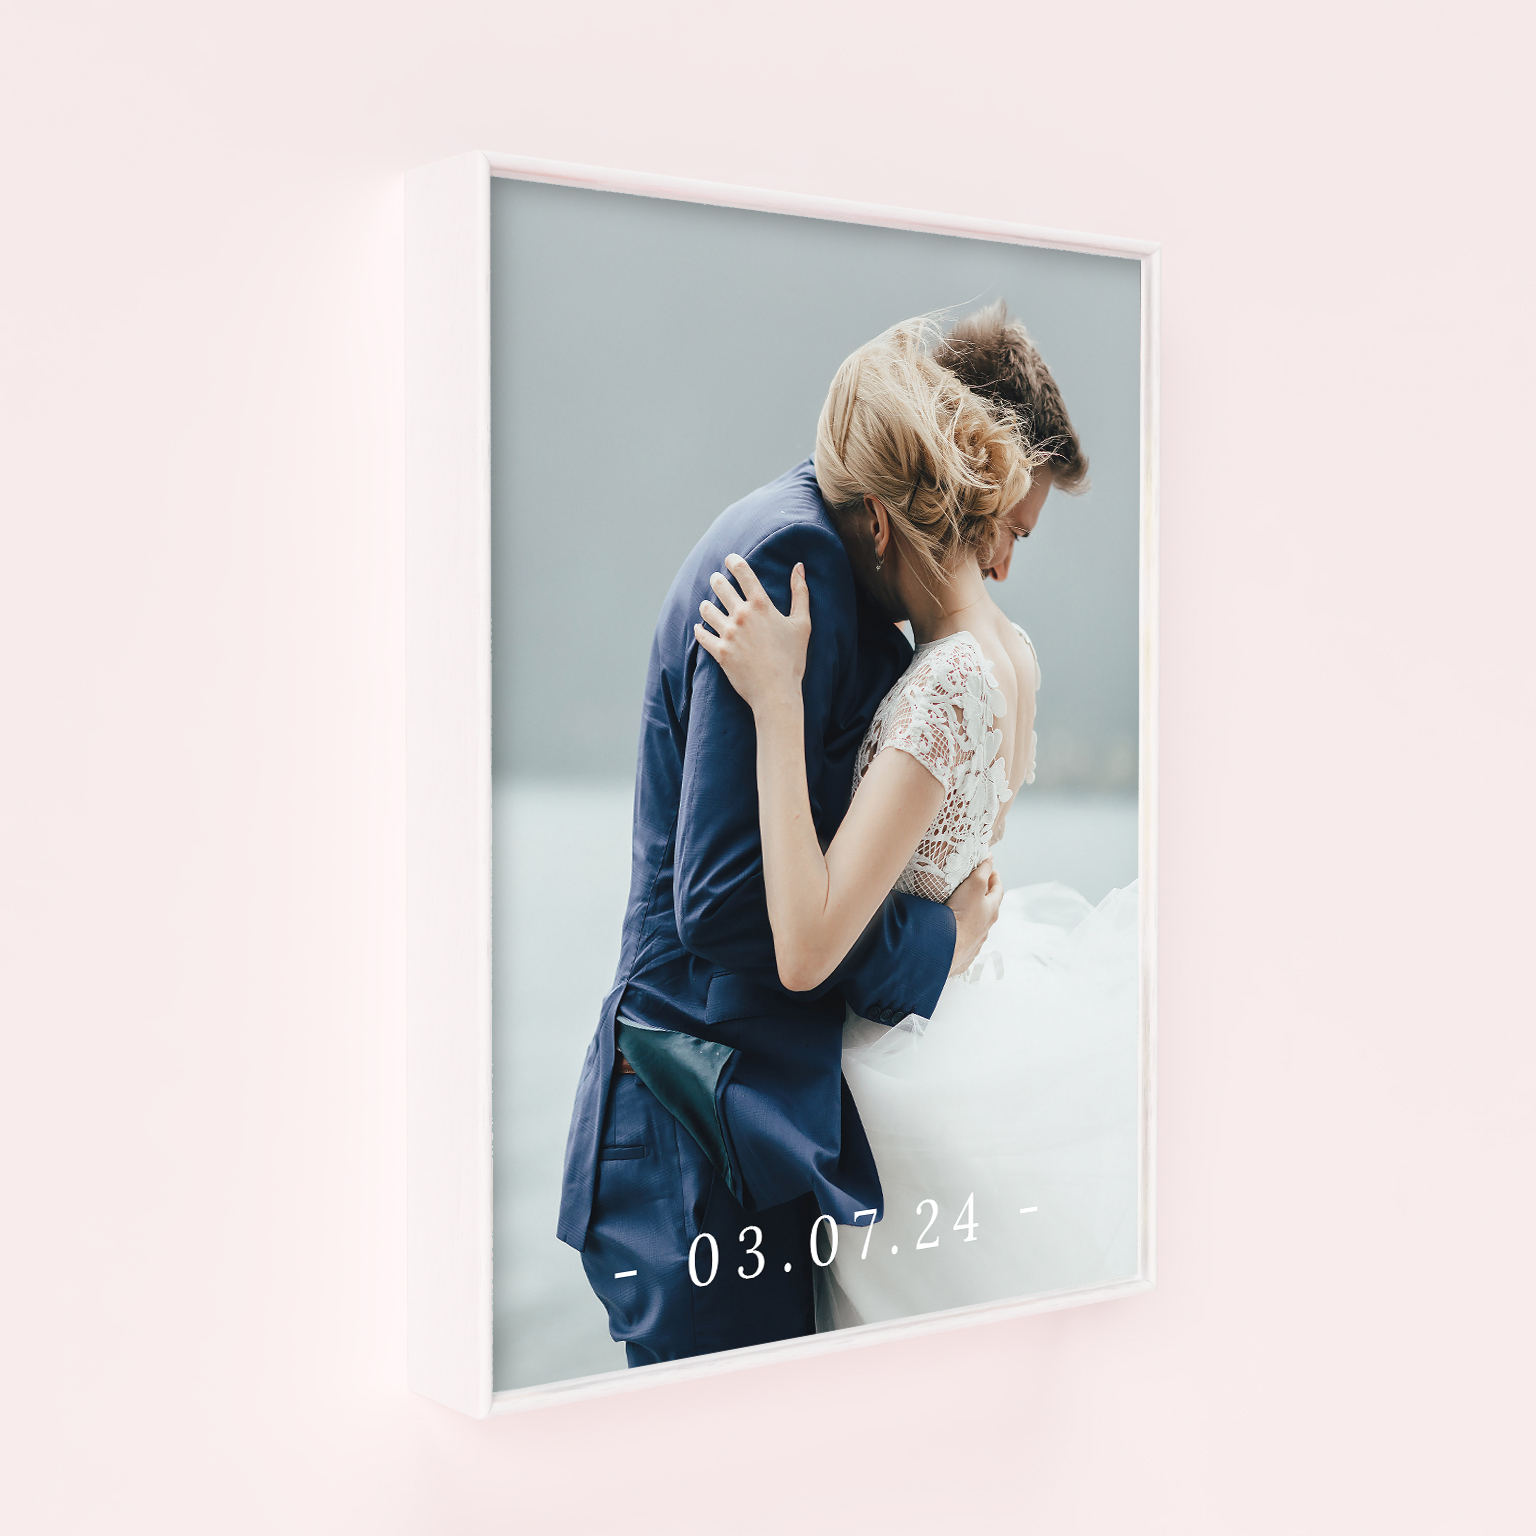 Date Stamp Box Framed Prints - Introducing our Box Framed Prints, the perfect canvas for your personalised date stamp design. This portrait-oriented masterpiece adds a captivating 3D effect, making your special photo truly stand out.